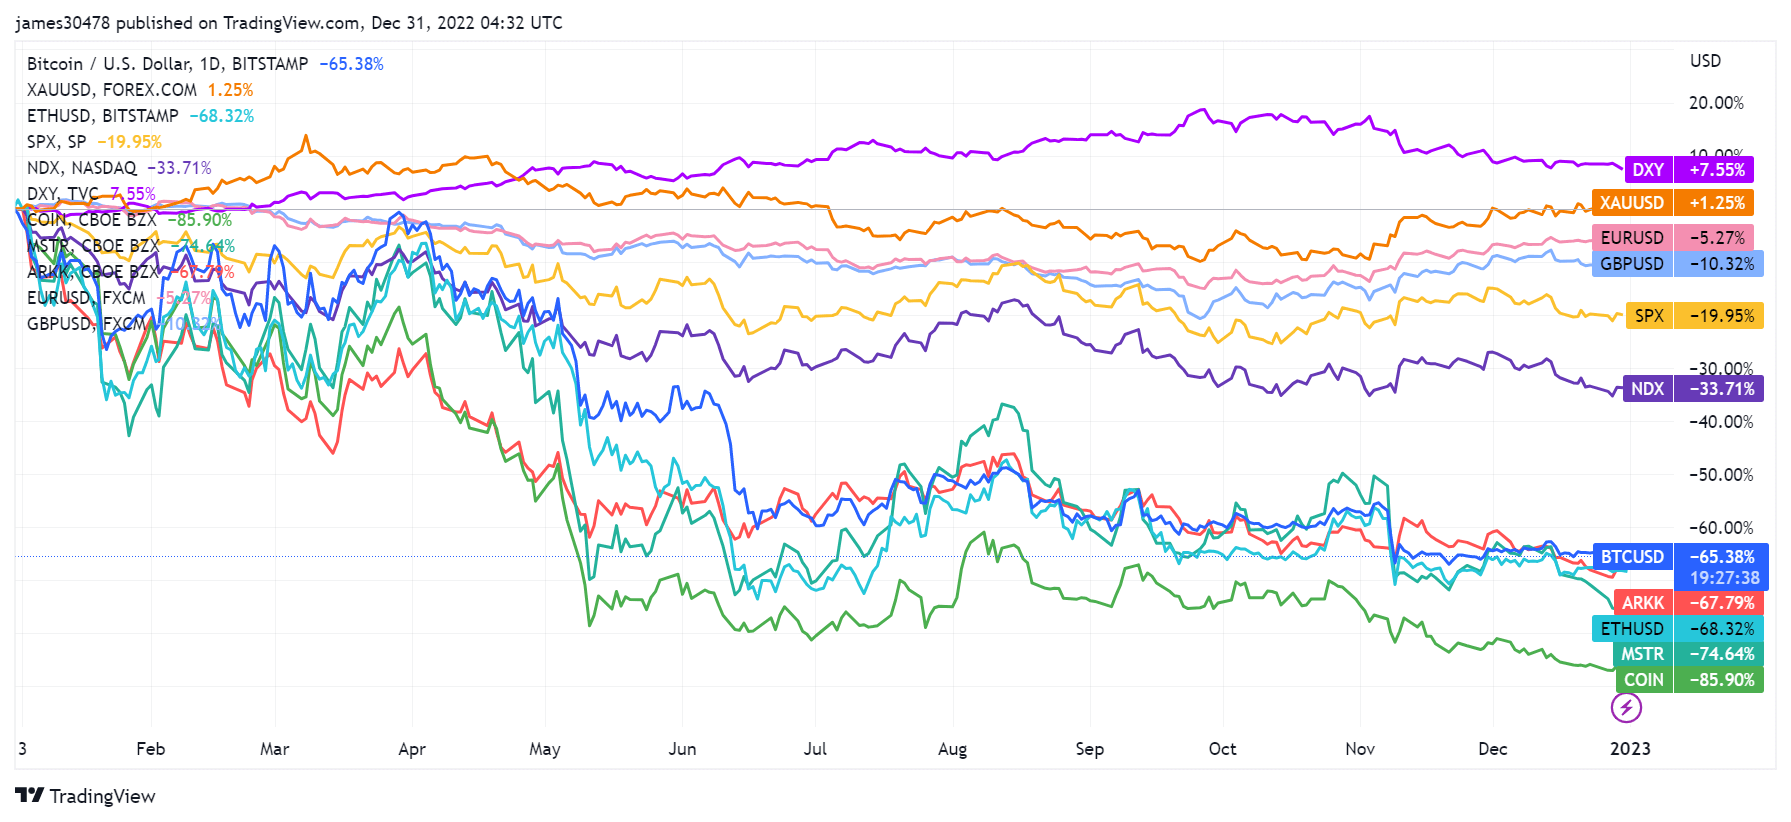 YTD assets and currencies